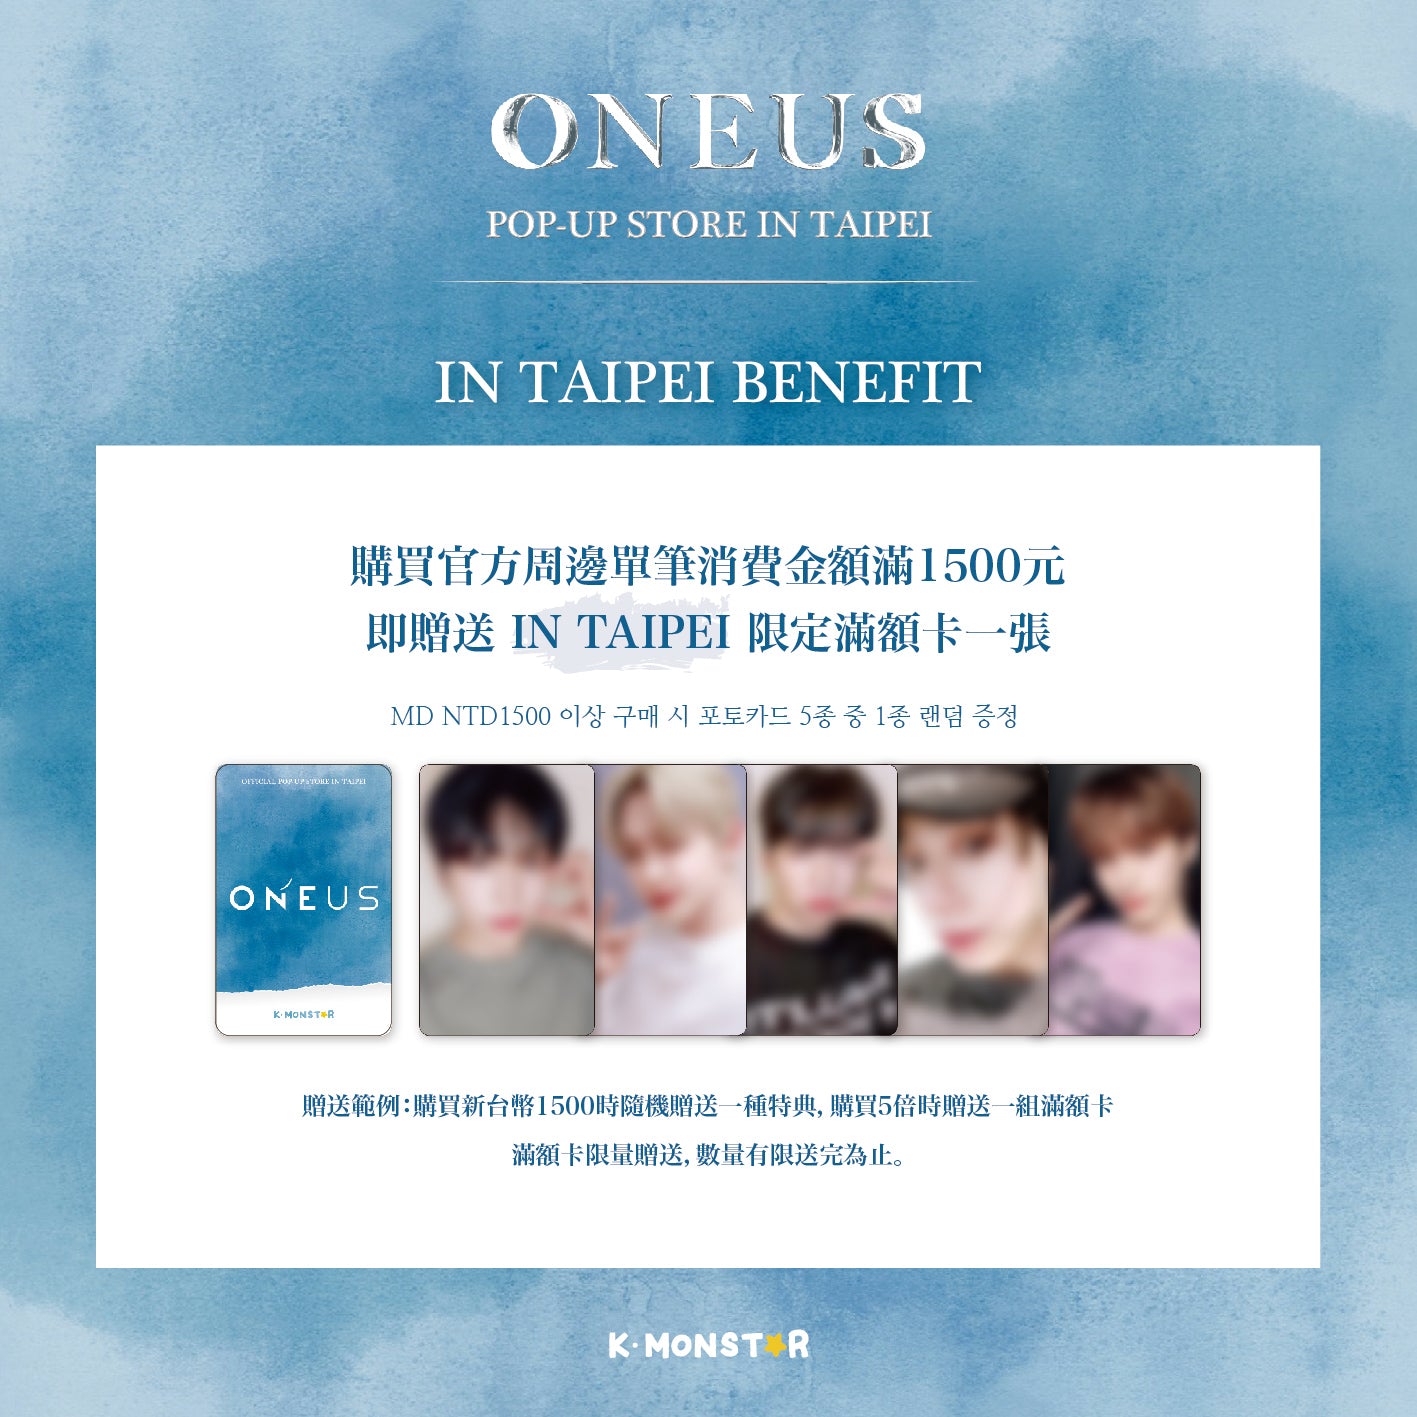 ONEUS | La Dolce Vita POP-UP STORE IN TAIPEI | USS SHOES ACCESSORY